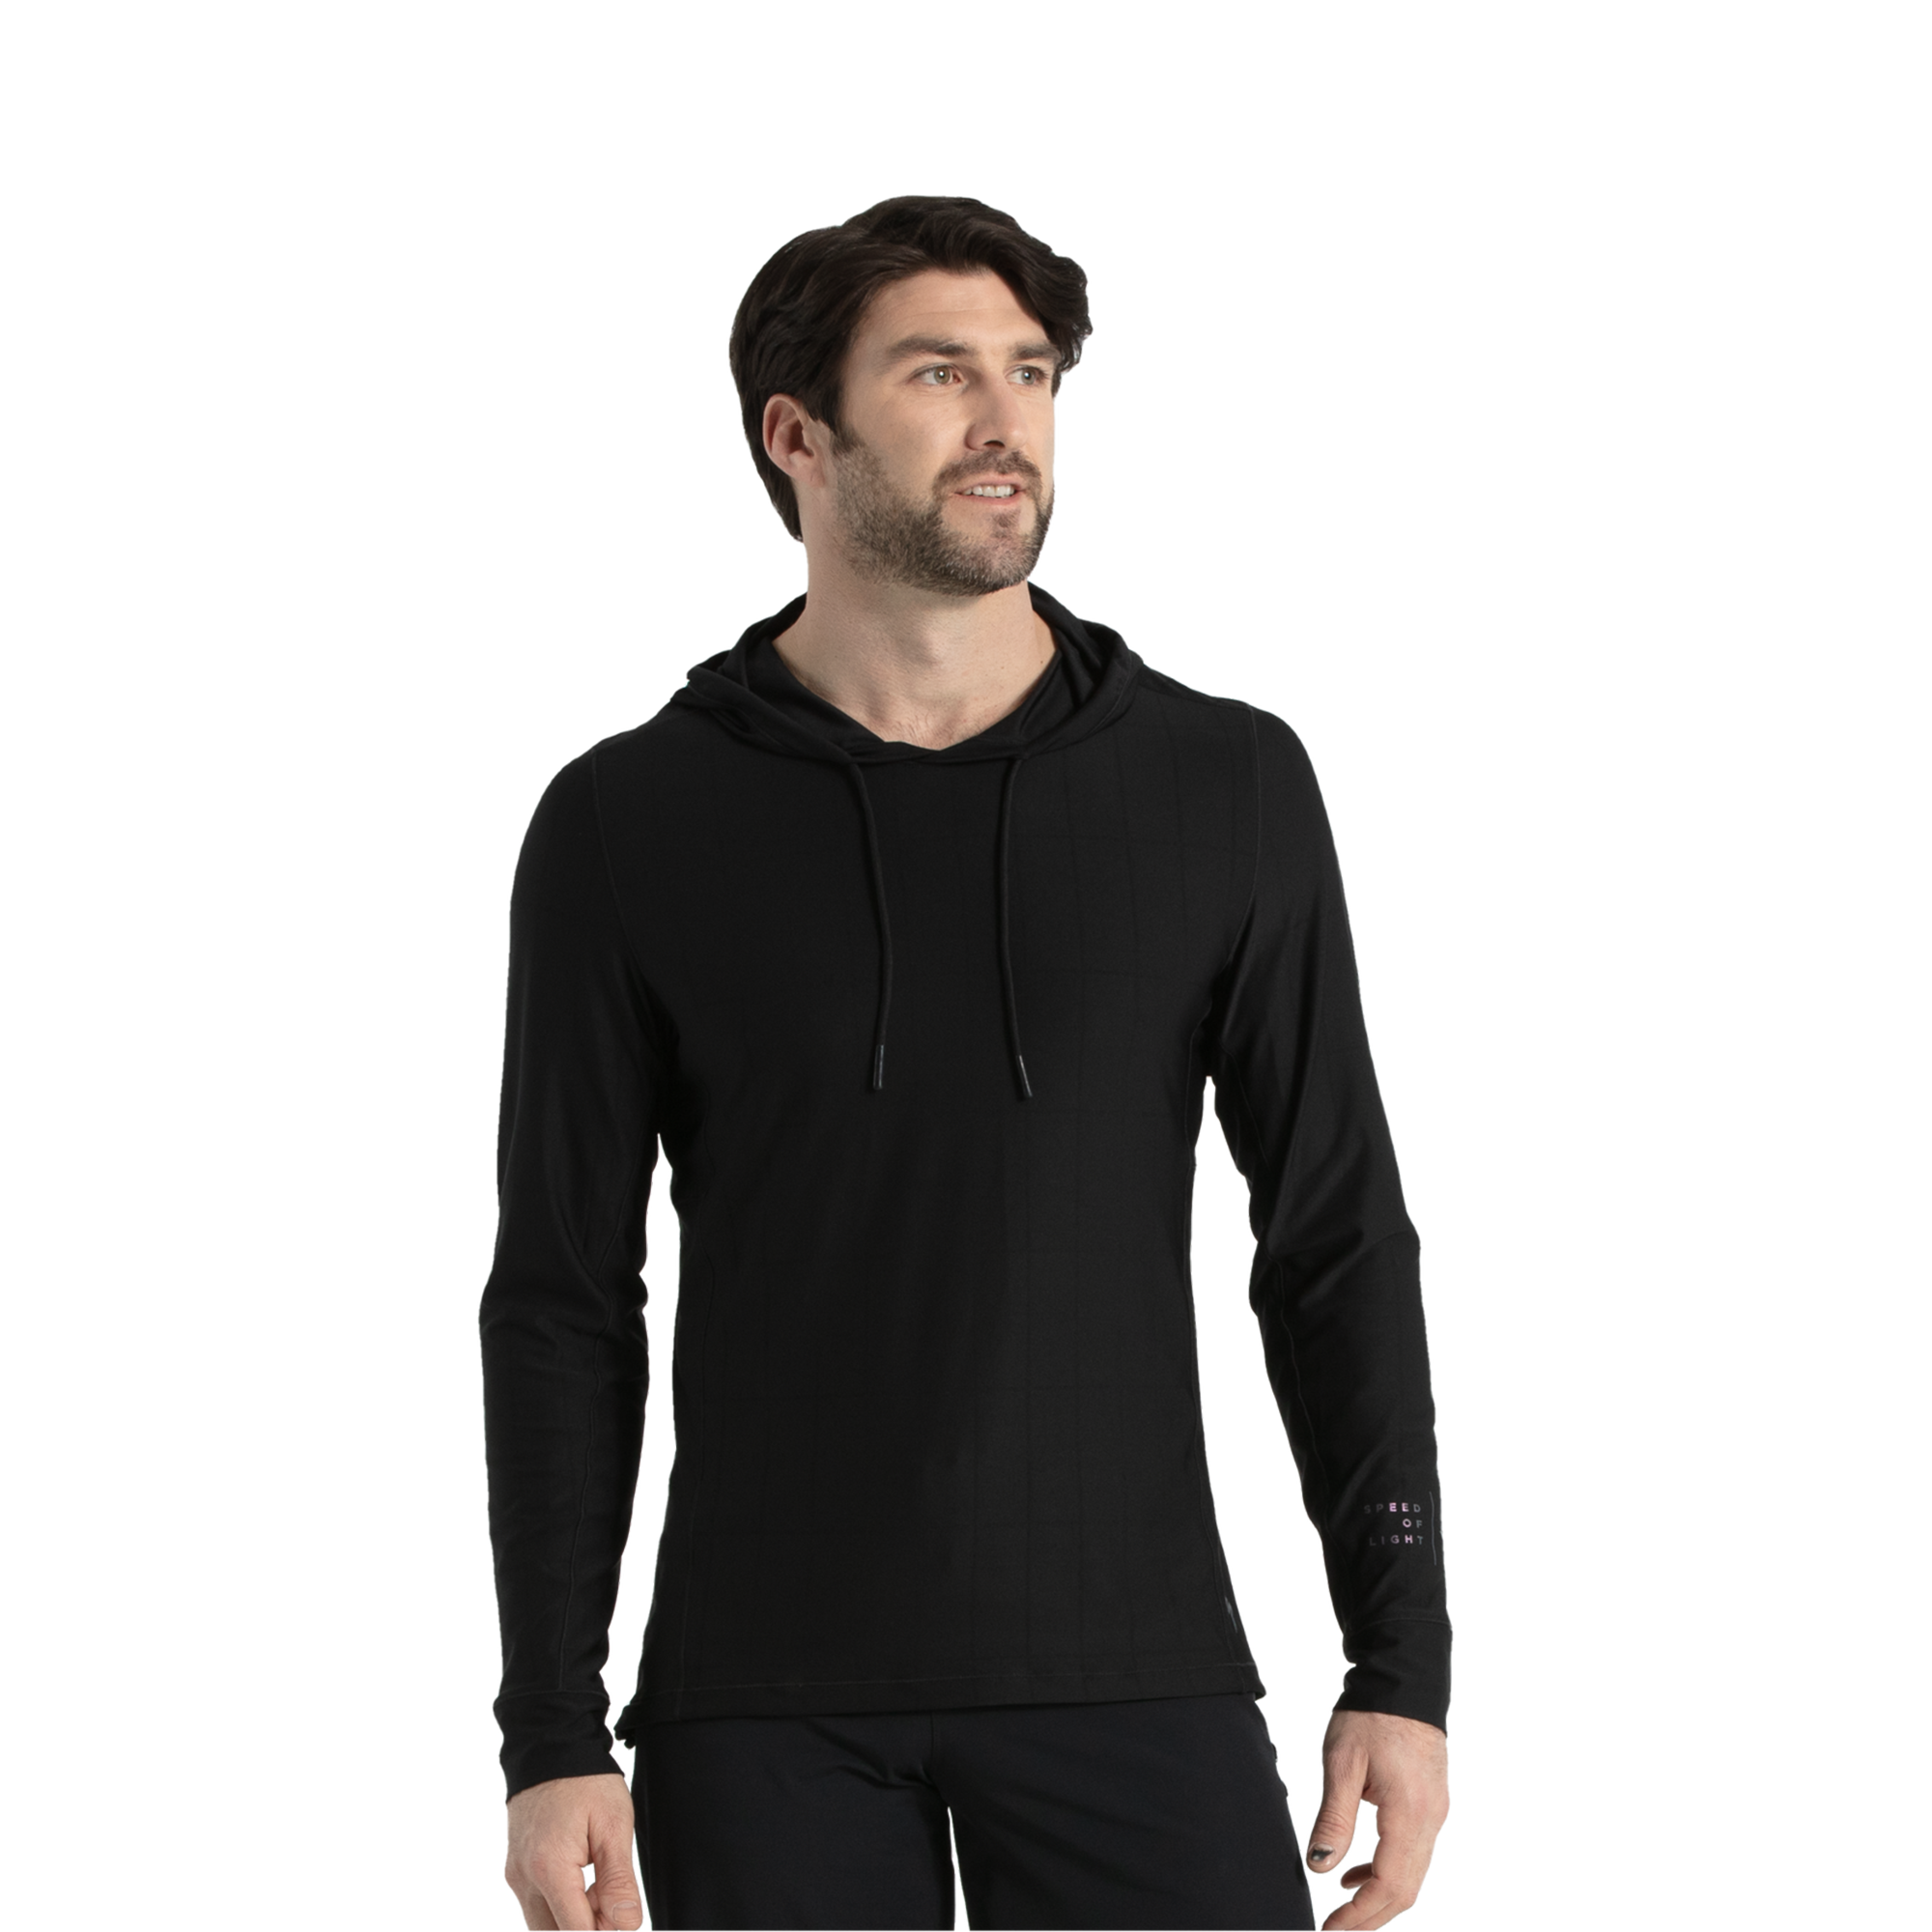 https://assets.specialized.com/i/specialized/64621-560_APP_SPEED-OF-LIGHT-LIGHTWEIGHT-HOODIE-MEN-DARK-WASH-M_PLP-HERO-SQUARE?$scom-plp-product-image-square$&fmt=auto